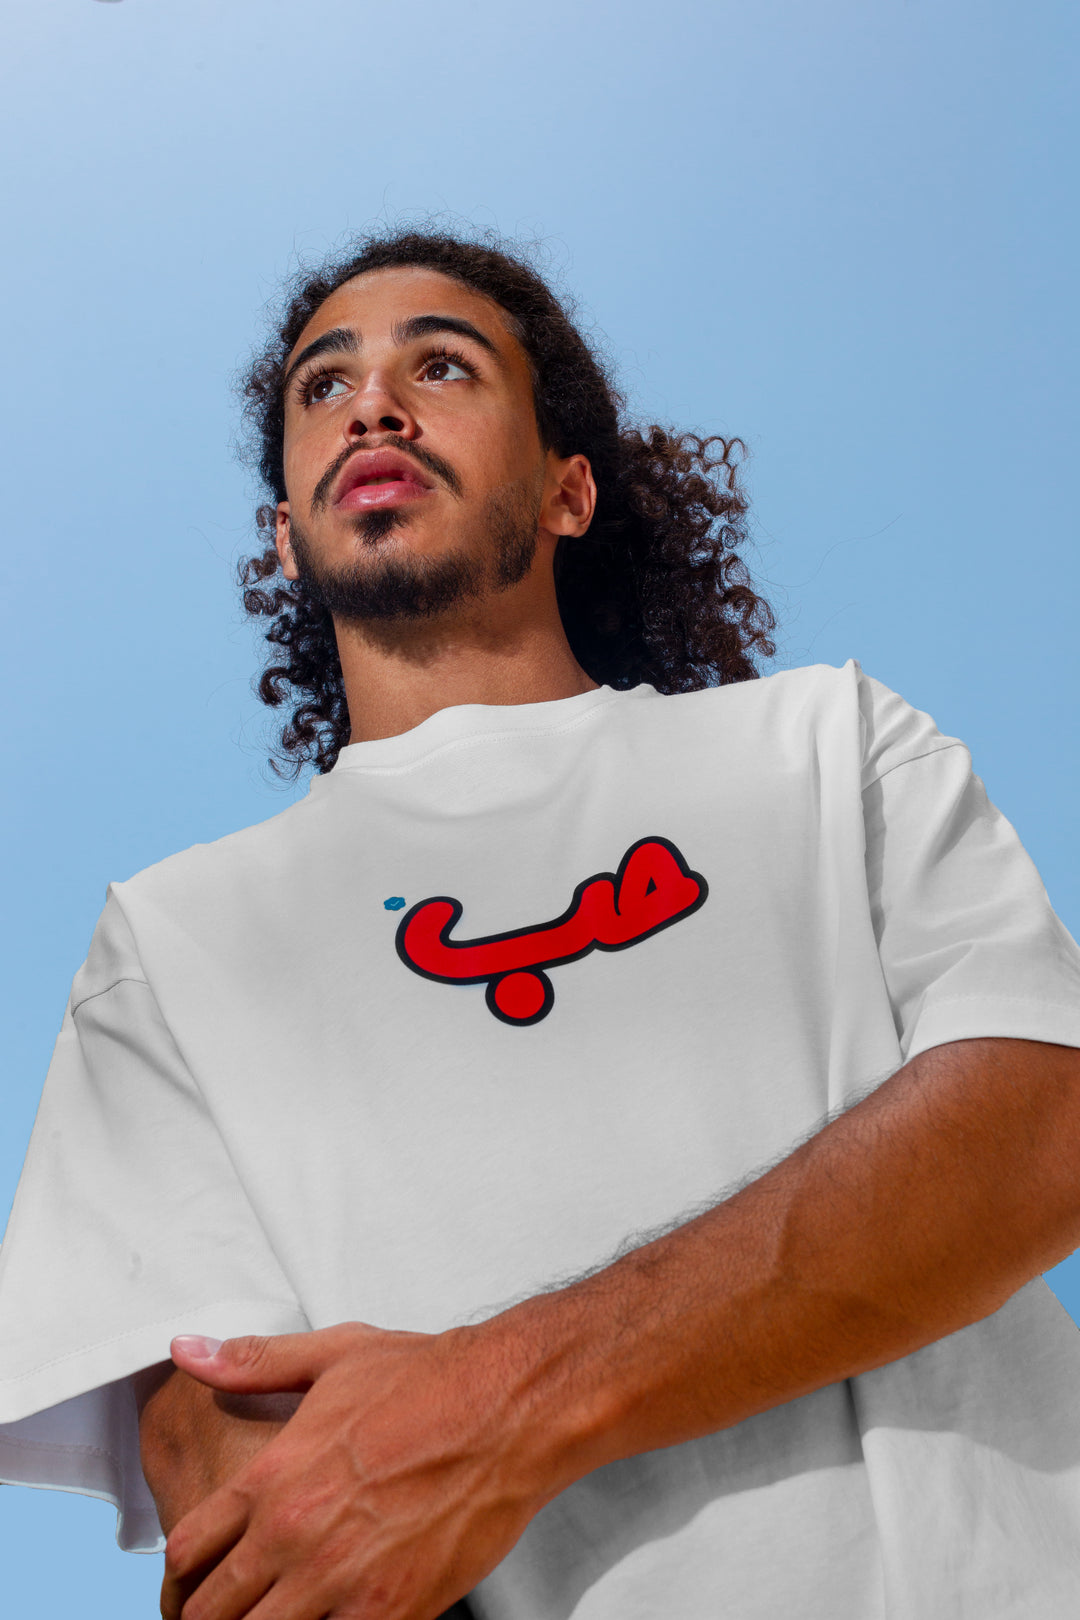 Young adult male wearing an Oversized white T-shirt with Verified Hobb written in Arabic حب and printed in red silkscreen in the center of the shirt.